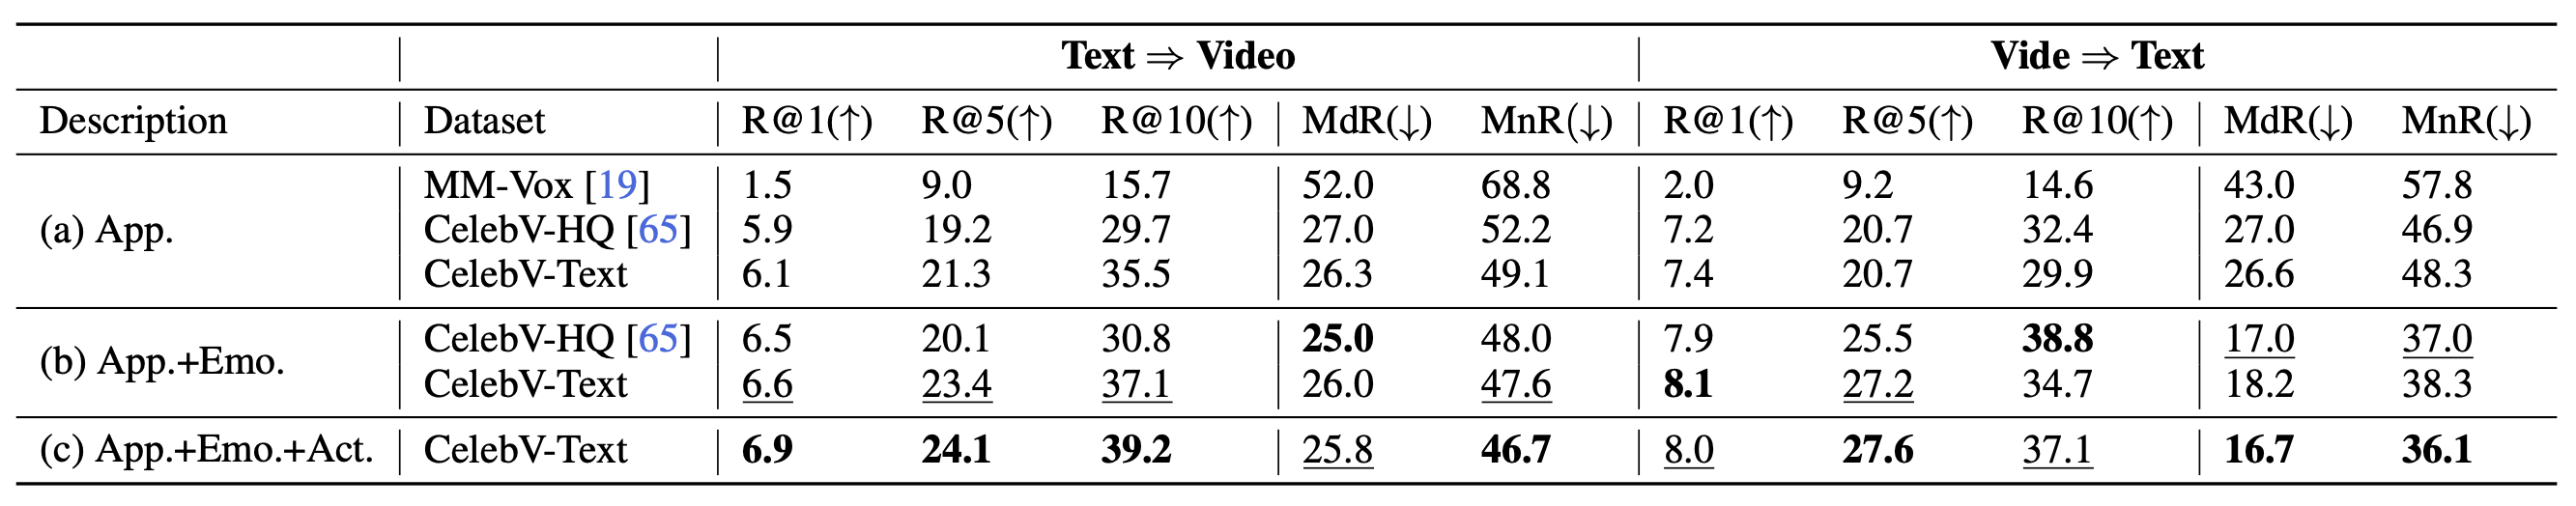 text-video rel